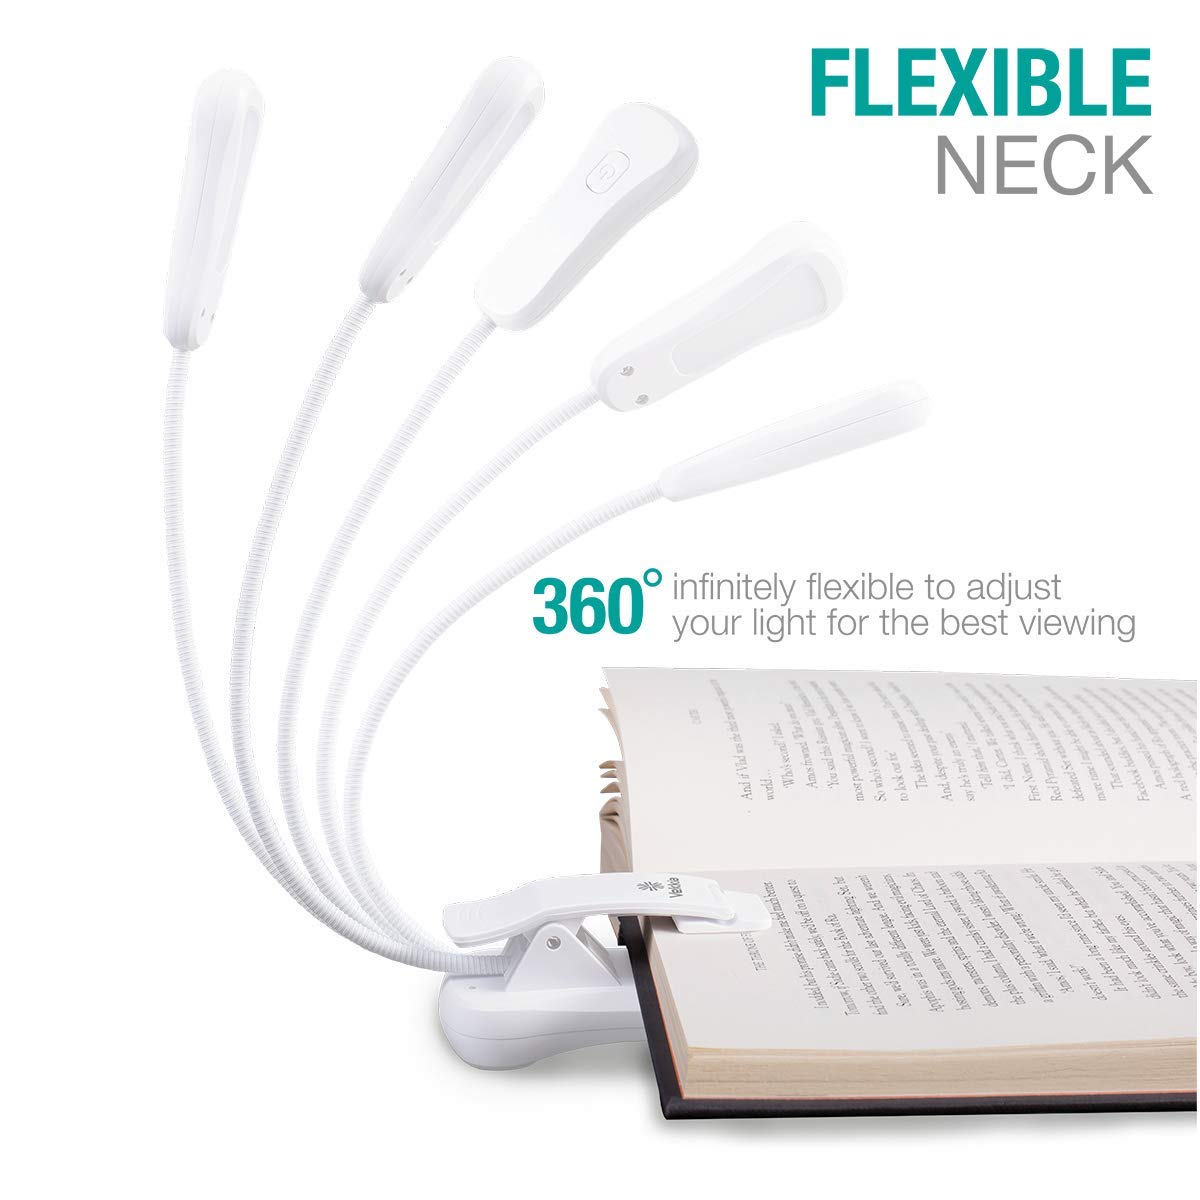 Vekkia 3000K Warm LED Rechargeable Book Light, Easy for Eyes, Clip on Reading Lights for Reading in Bed, Car & Travel, Lightweight Slim 2.1 oz. Perfect for Readers (Elegant White)